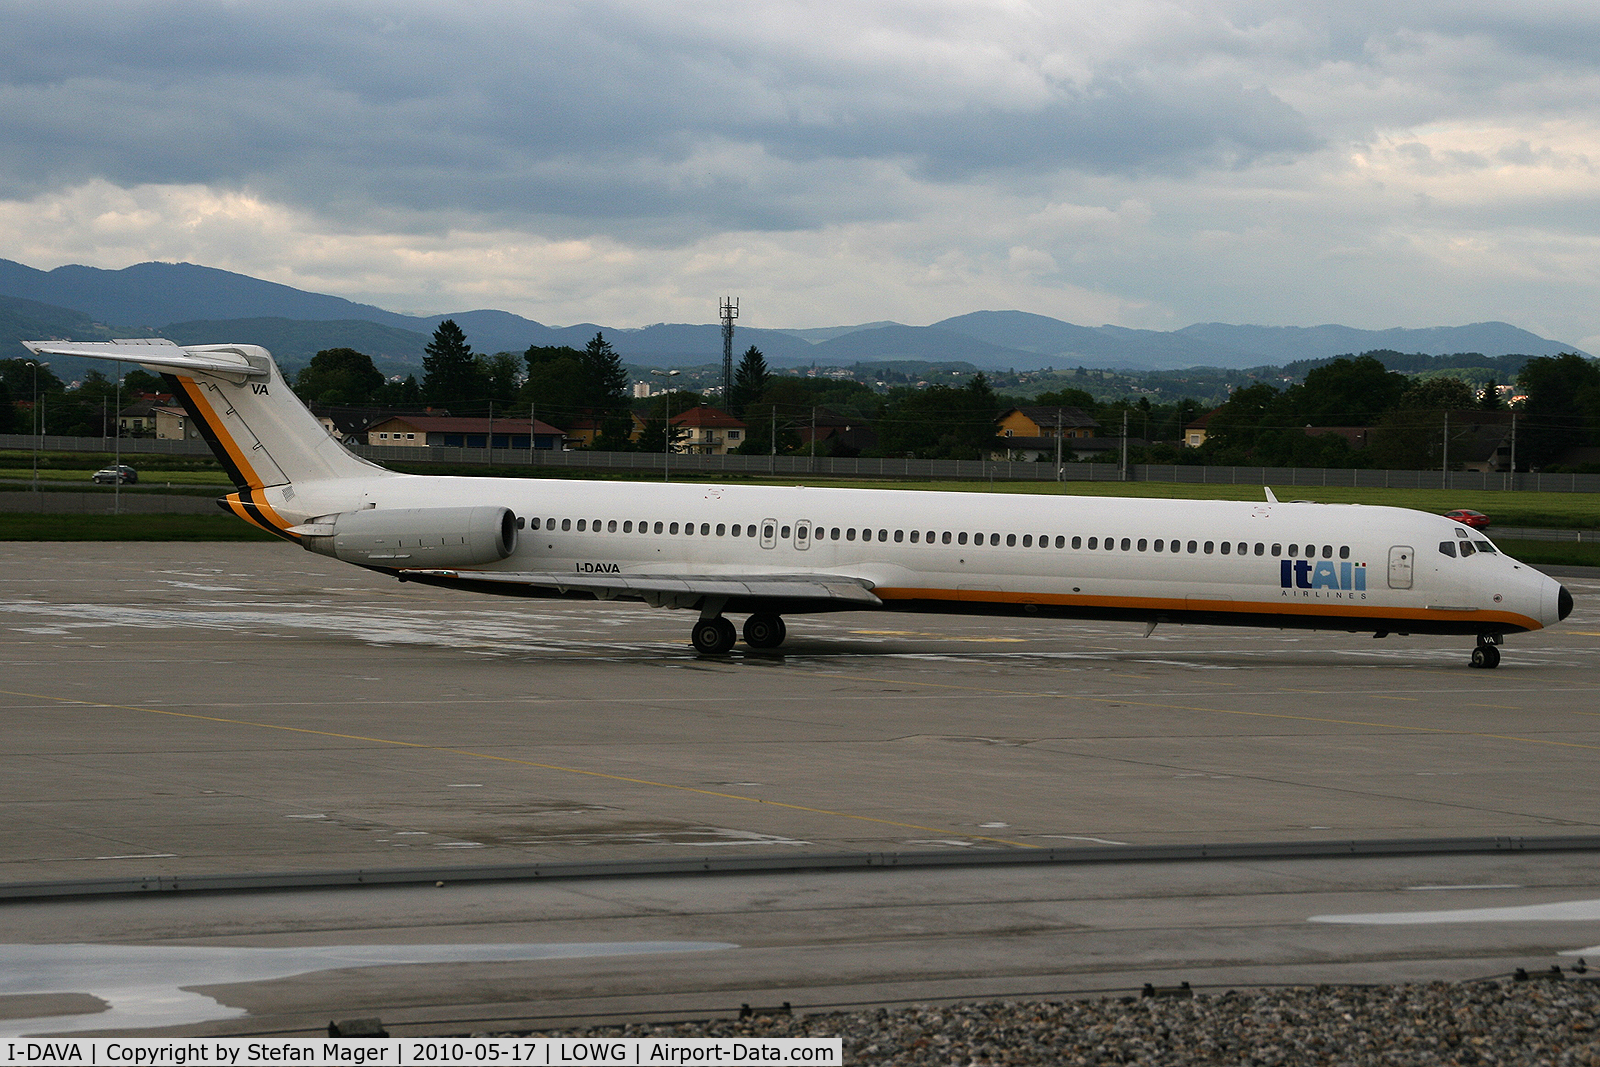 I-DAVA, 1986 McDonnell Douglas MD-82 (DC-9-82) C/N 49215, Itali Airlines MD-82